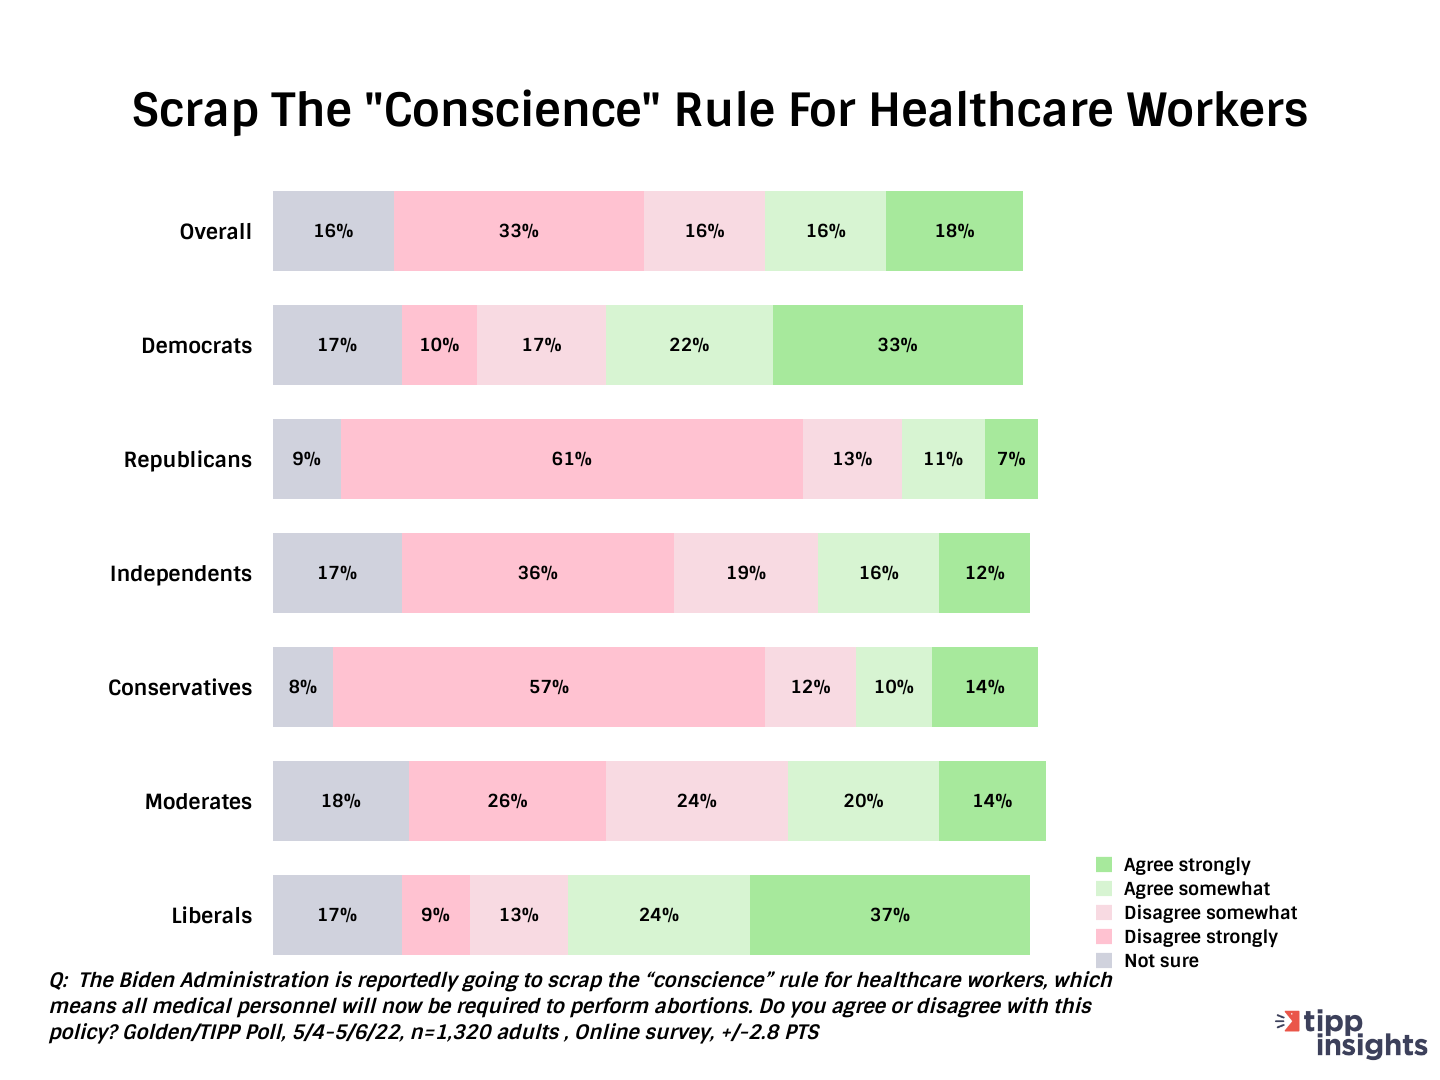 More oppose than support plans to scrap health workers "conscience" rule. By party